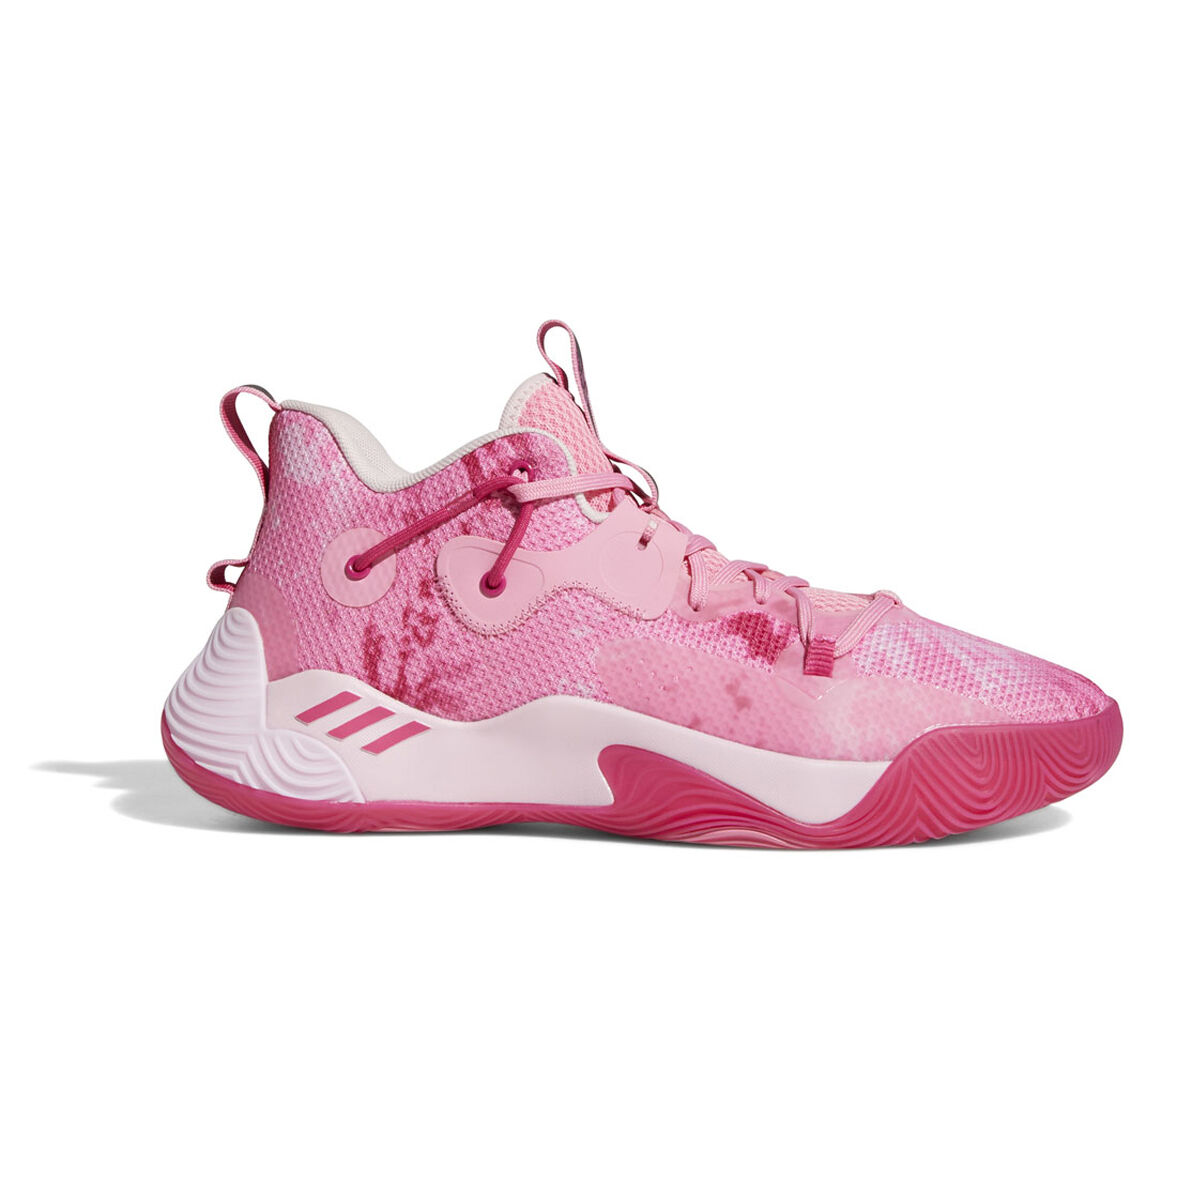 Harden Stepback 3 Basketball Shoes in Pink/Bliss Pink Size 8.0 Lace Finish Line Sport & Swimwear Sportswear Sports Shoes Basketball 